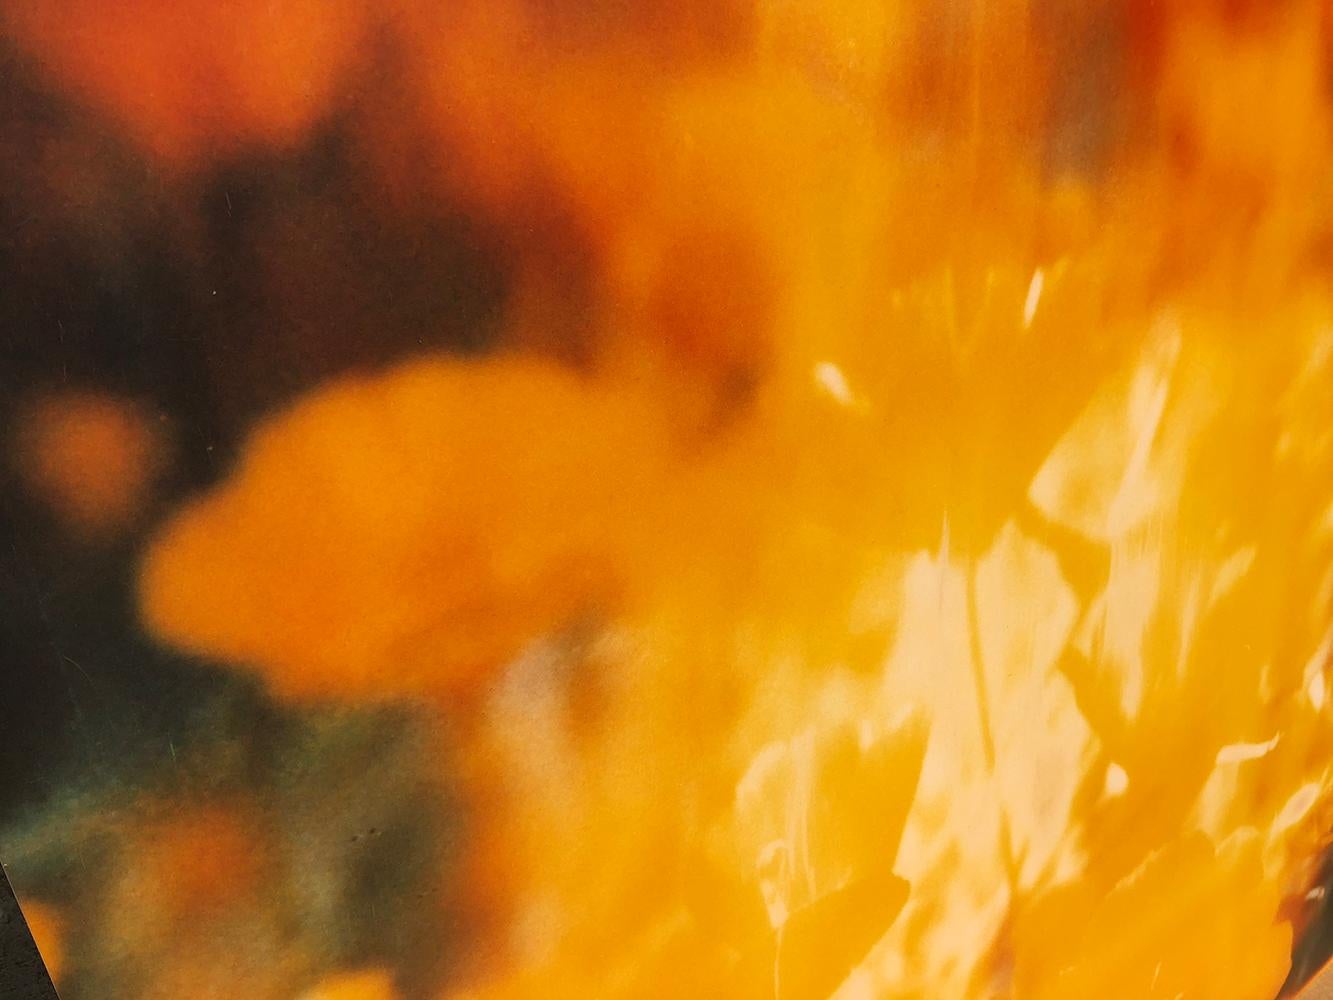 Yellow Flower (The Last Picture Show) 128x125cm, 2005, 
Edition 4/5, 

Analog C-Print, hand-printed and enlarged by the artist on Fuji Crystal Archive Paper, 
based on a Stefanie Schneider expired Polaroid photograph, 
sigened on verso, Artist